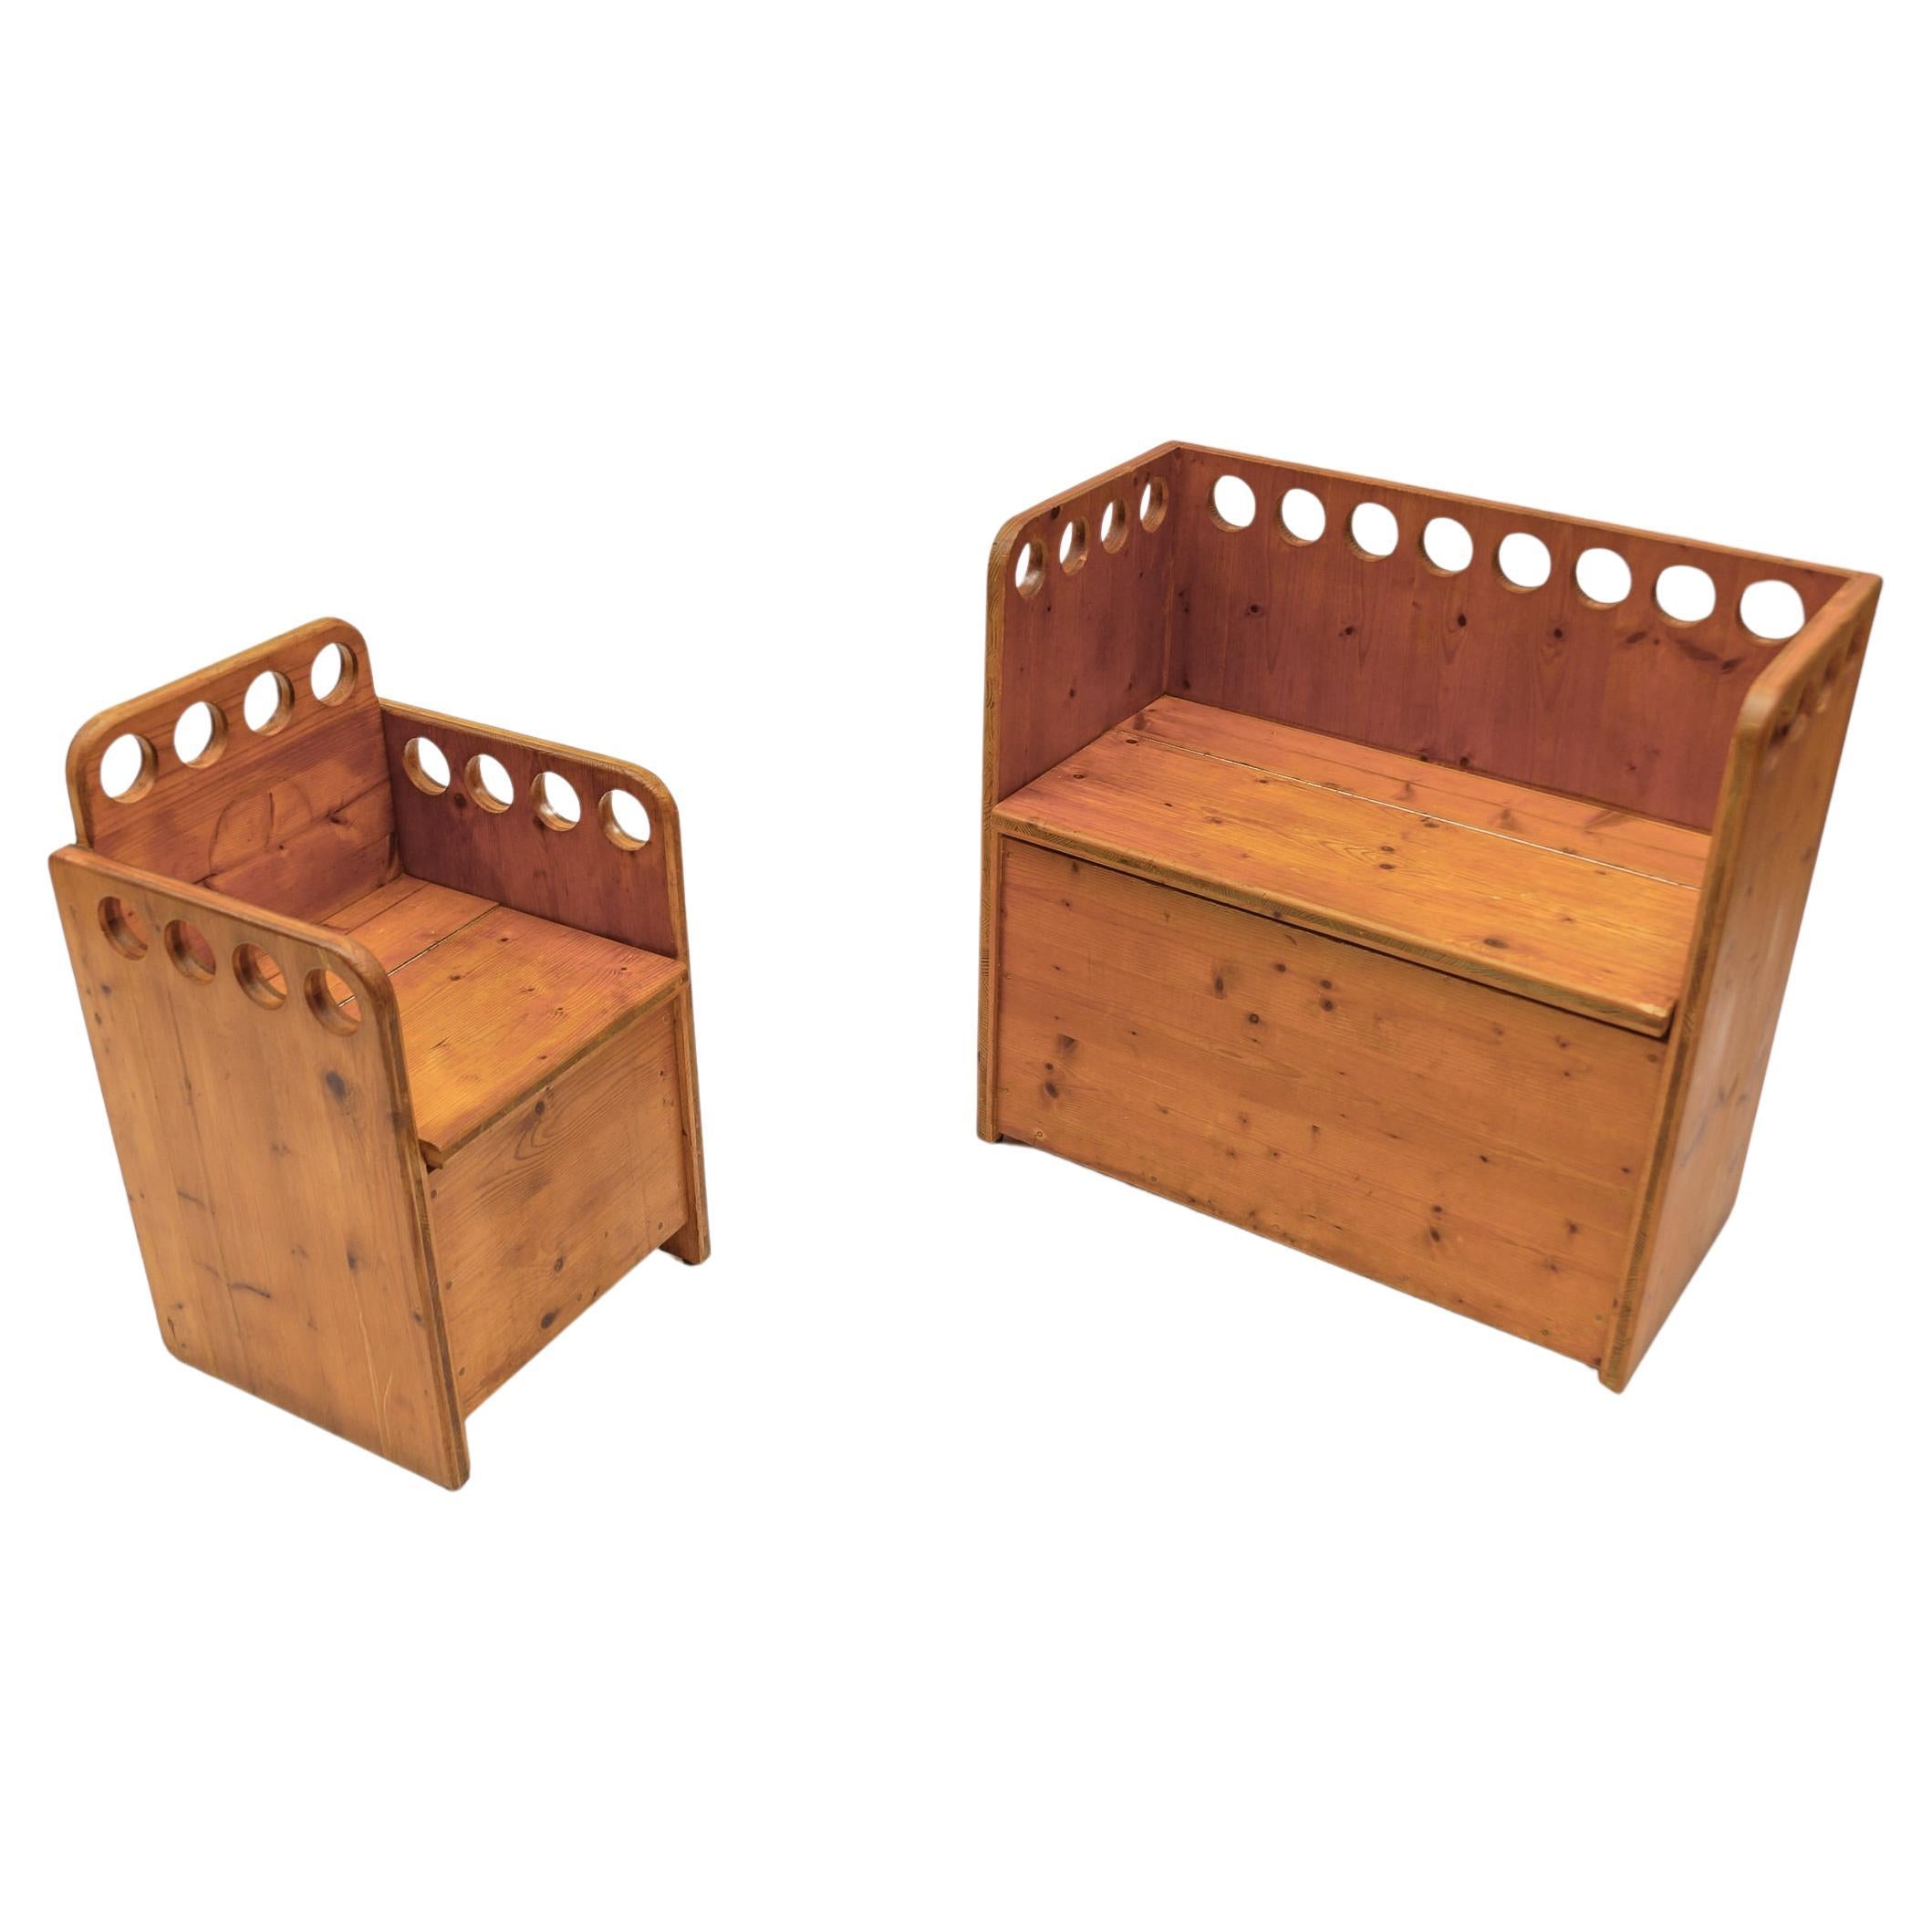 Awesome and Rare Scandinavian Pine Wood Childs Set - Chair and Bench, 1960s For Sale